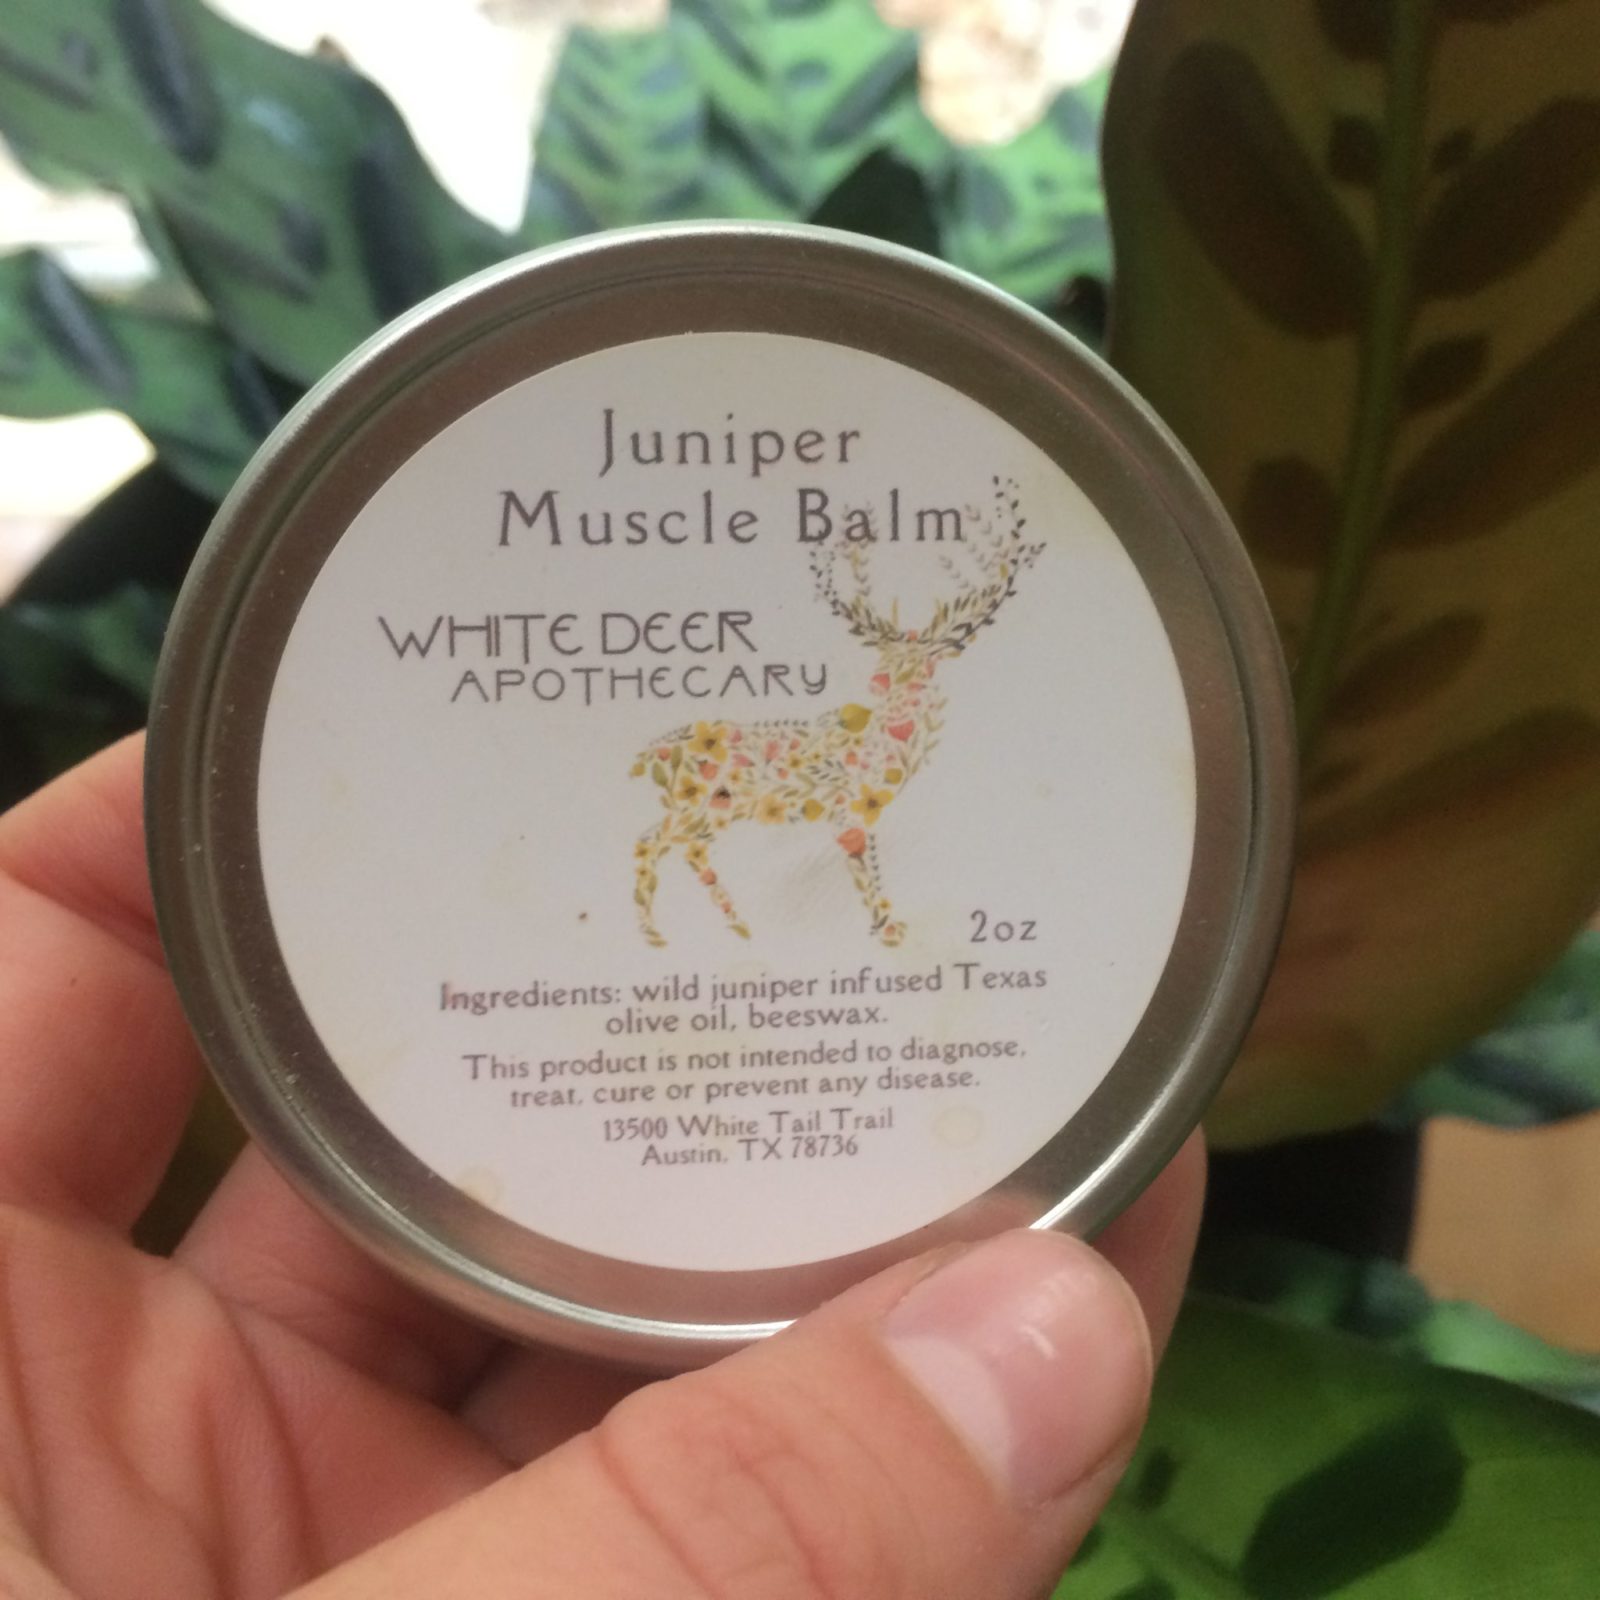 White Deer Apothecary Muscle Balm Juniper Herbalist